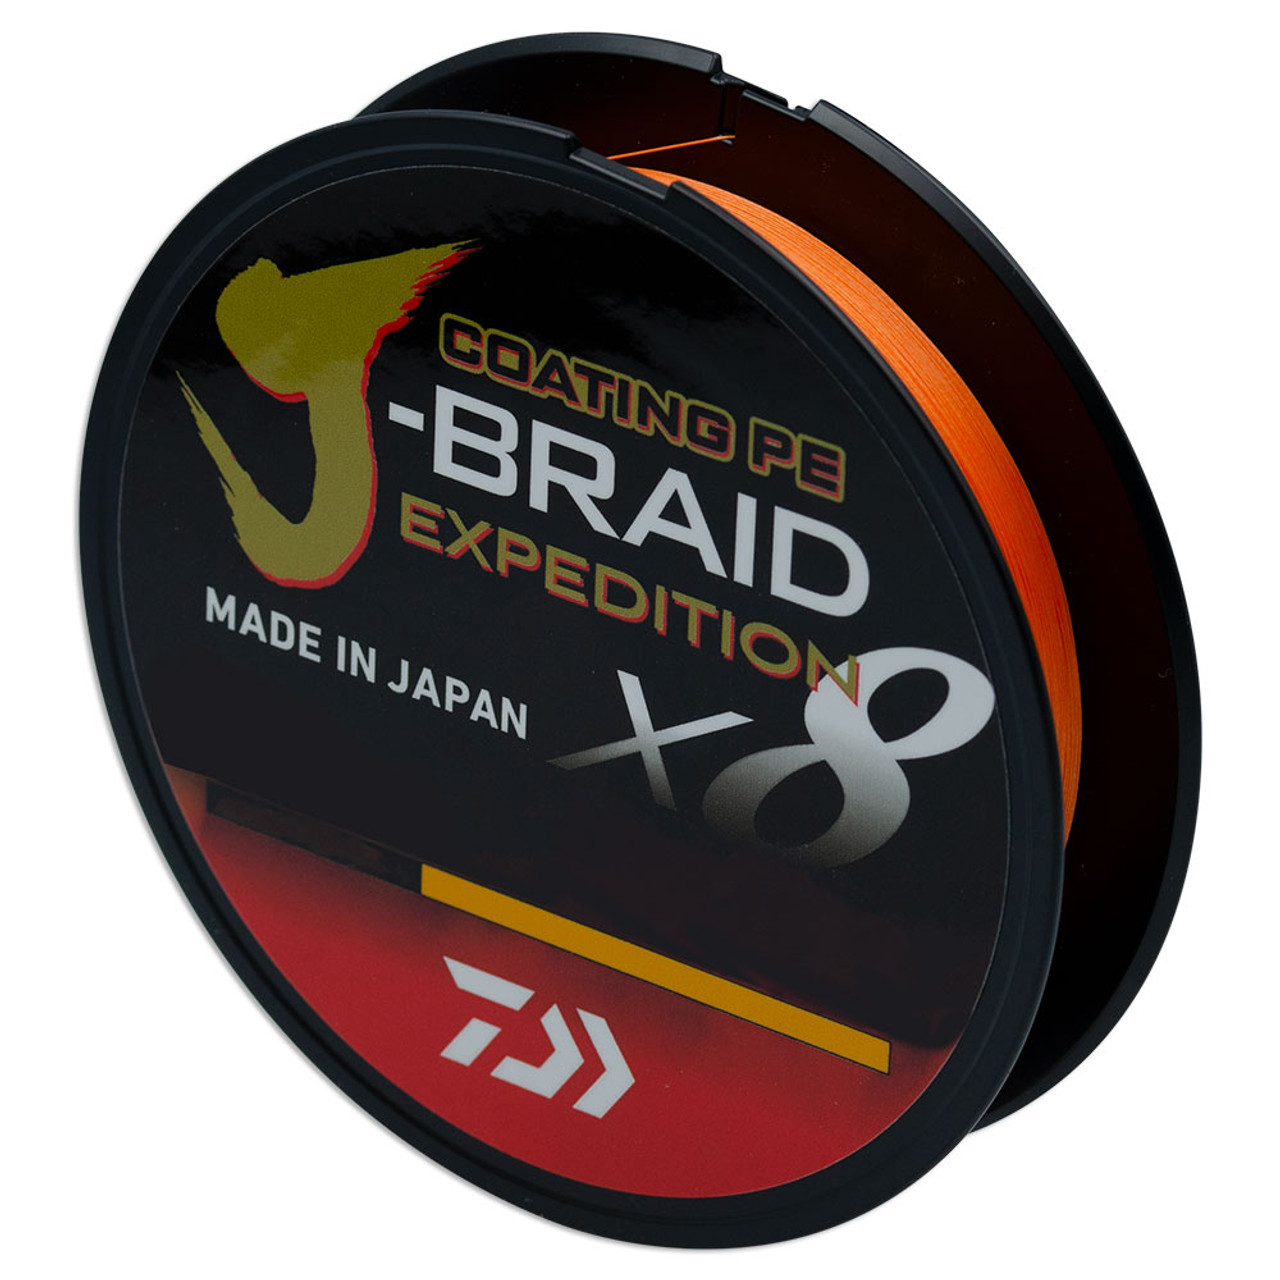 Daiwa Expedition J-Braid (it's the real deal) 